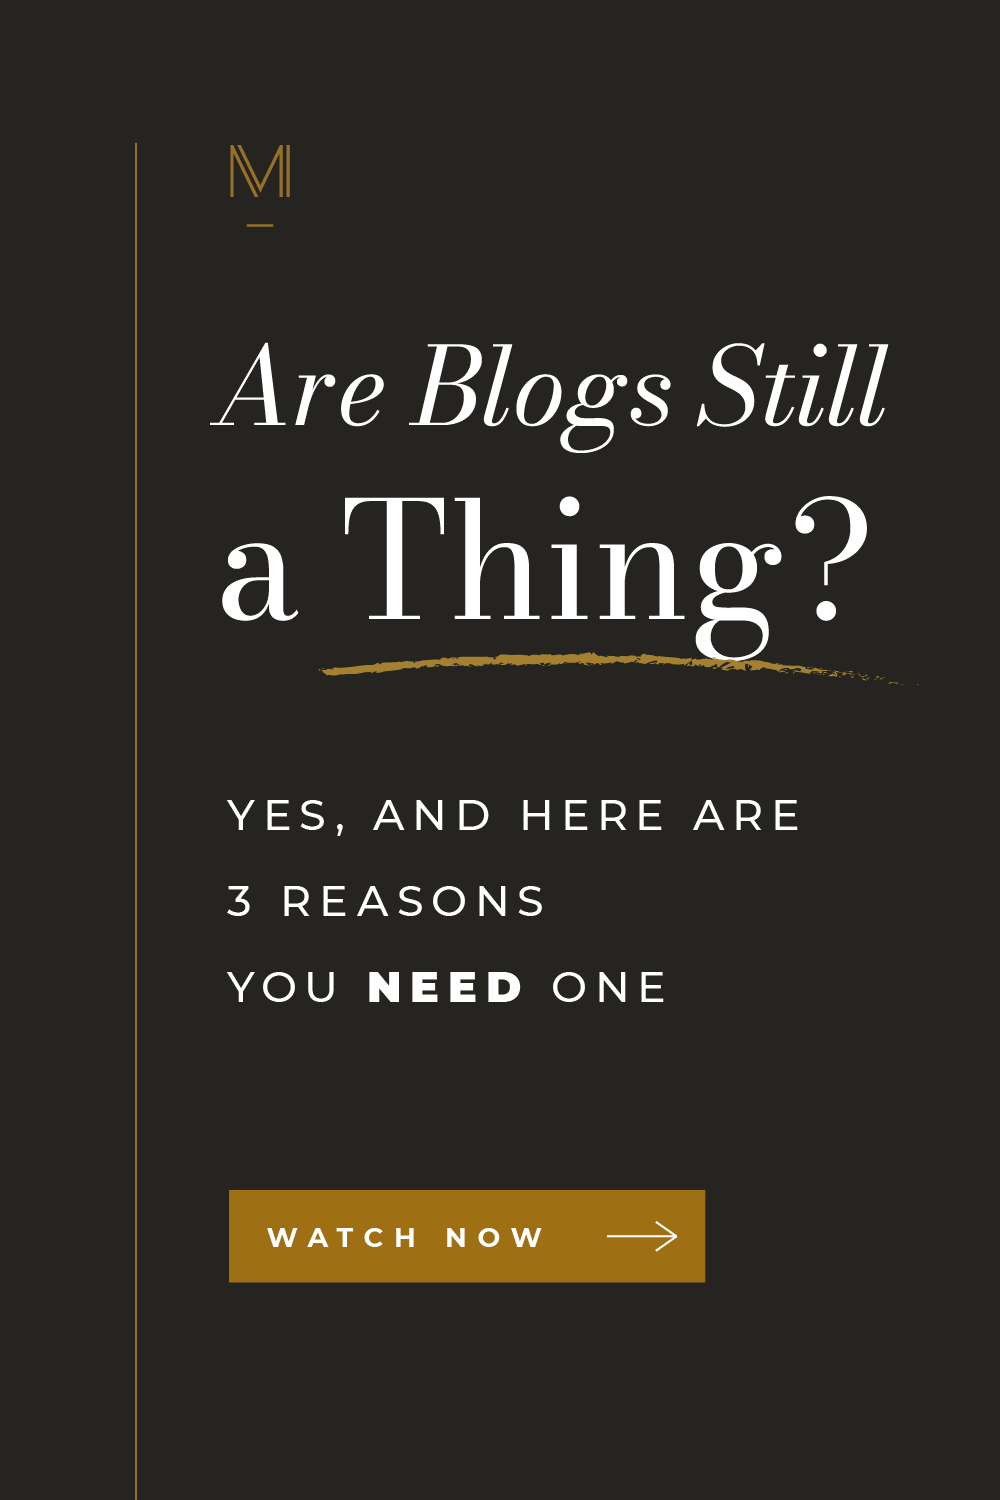 Are you wondering how you can use your blog to reach more dream clients? This blog post is for you! I’m sharing my best blogging advice so you can learn how to use this powerful marketing tool to expand your reach and make more money. It’s all here in my top 3 tips for blogging! #blogging #bloggingtips #blogger #contentmarketing